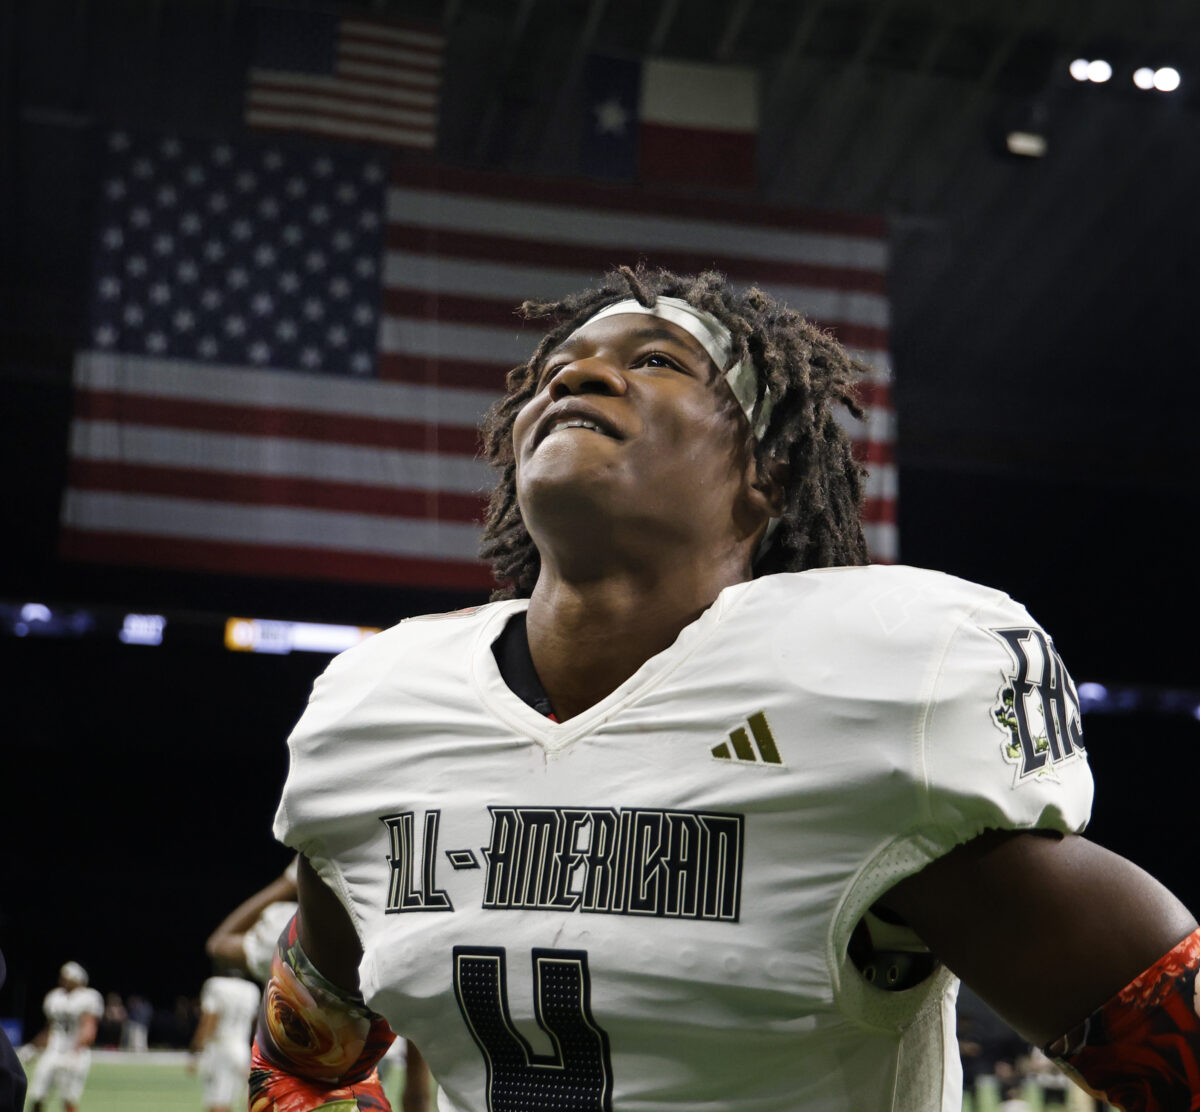 The 2025 All-American Bowl will break from a long-standing decision, allow juniors to play